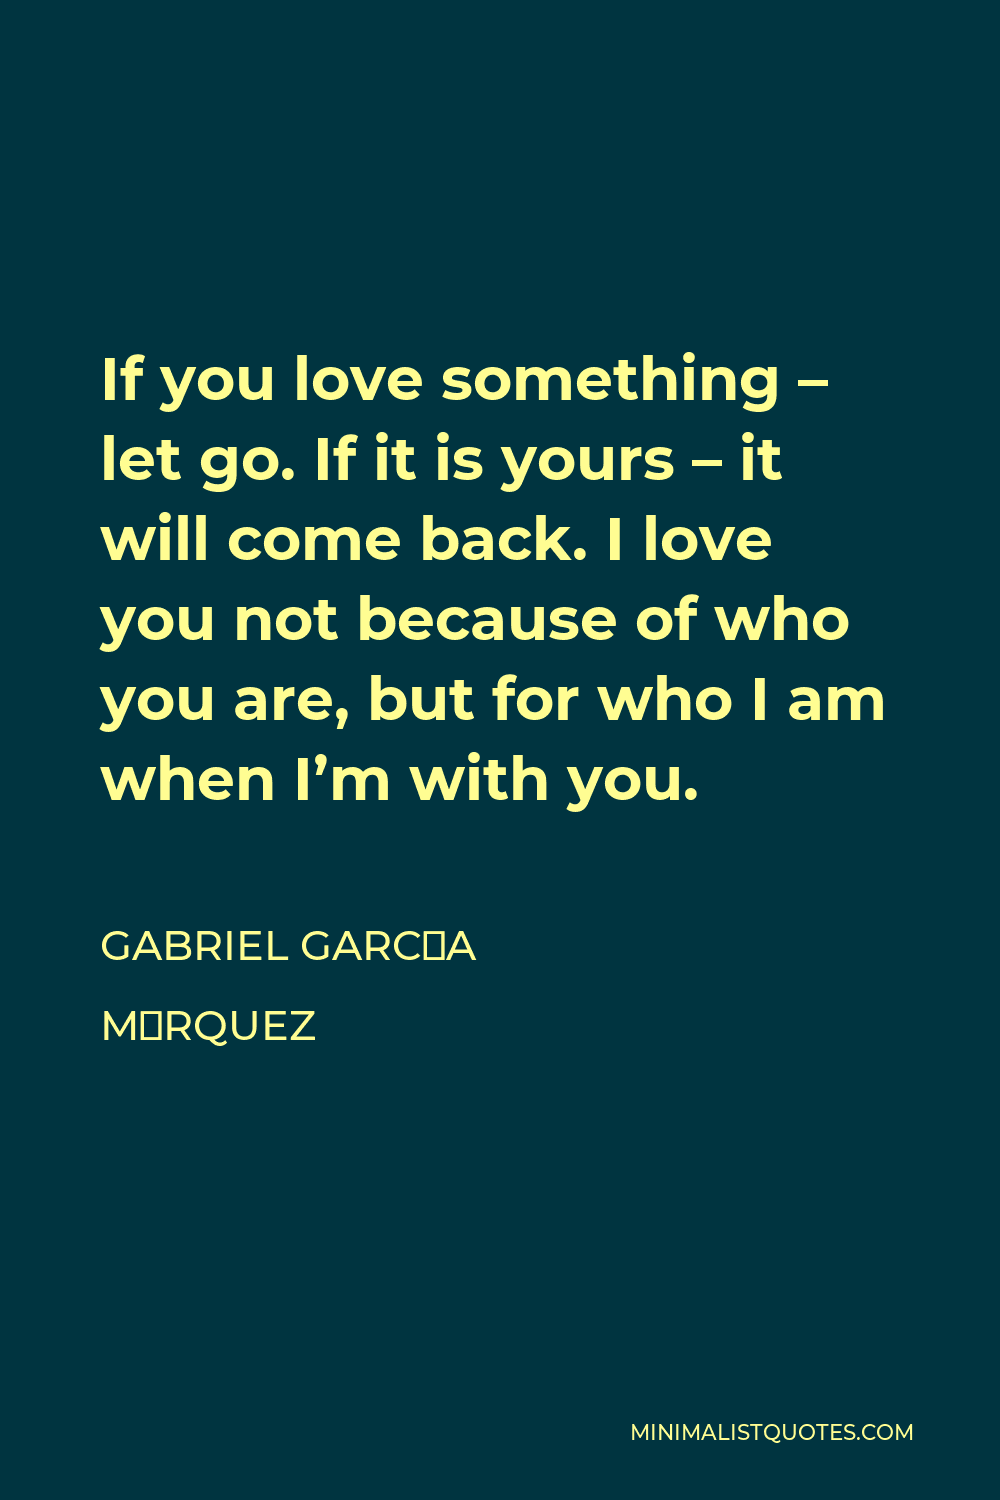 Gabriel García Márquez Quote - If you love something – let go. If it is yours – it will come back. I love you not because of who you are, but for who I am when I’m with you.